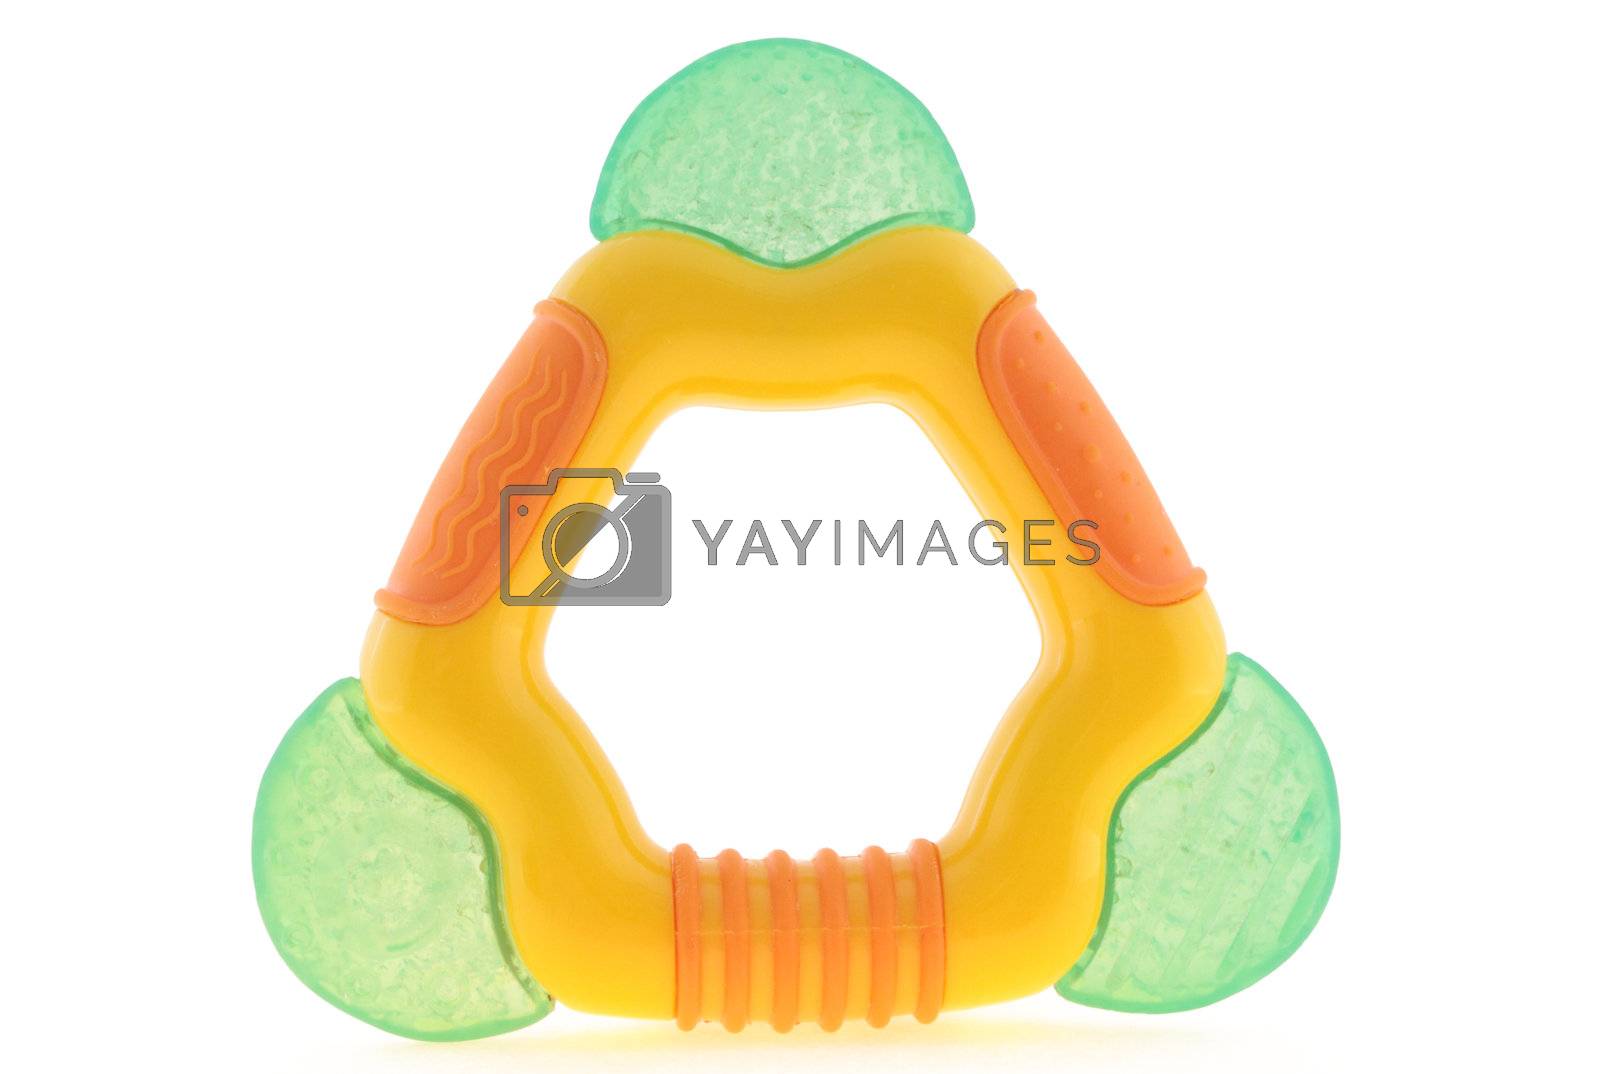 Royalty free image of Baby toy by restyler